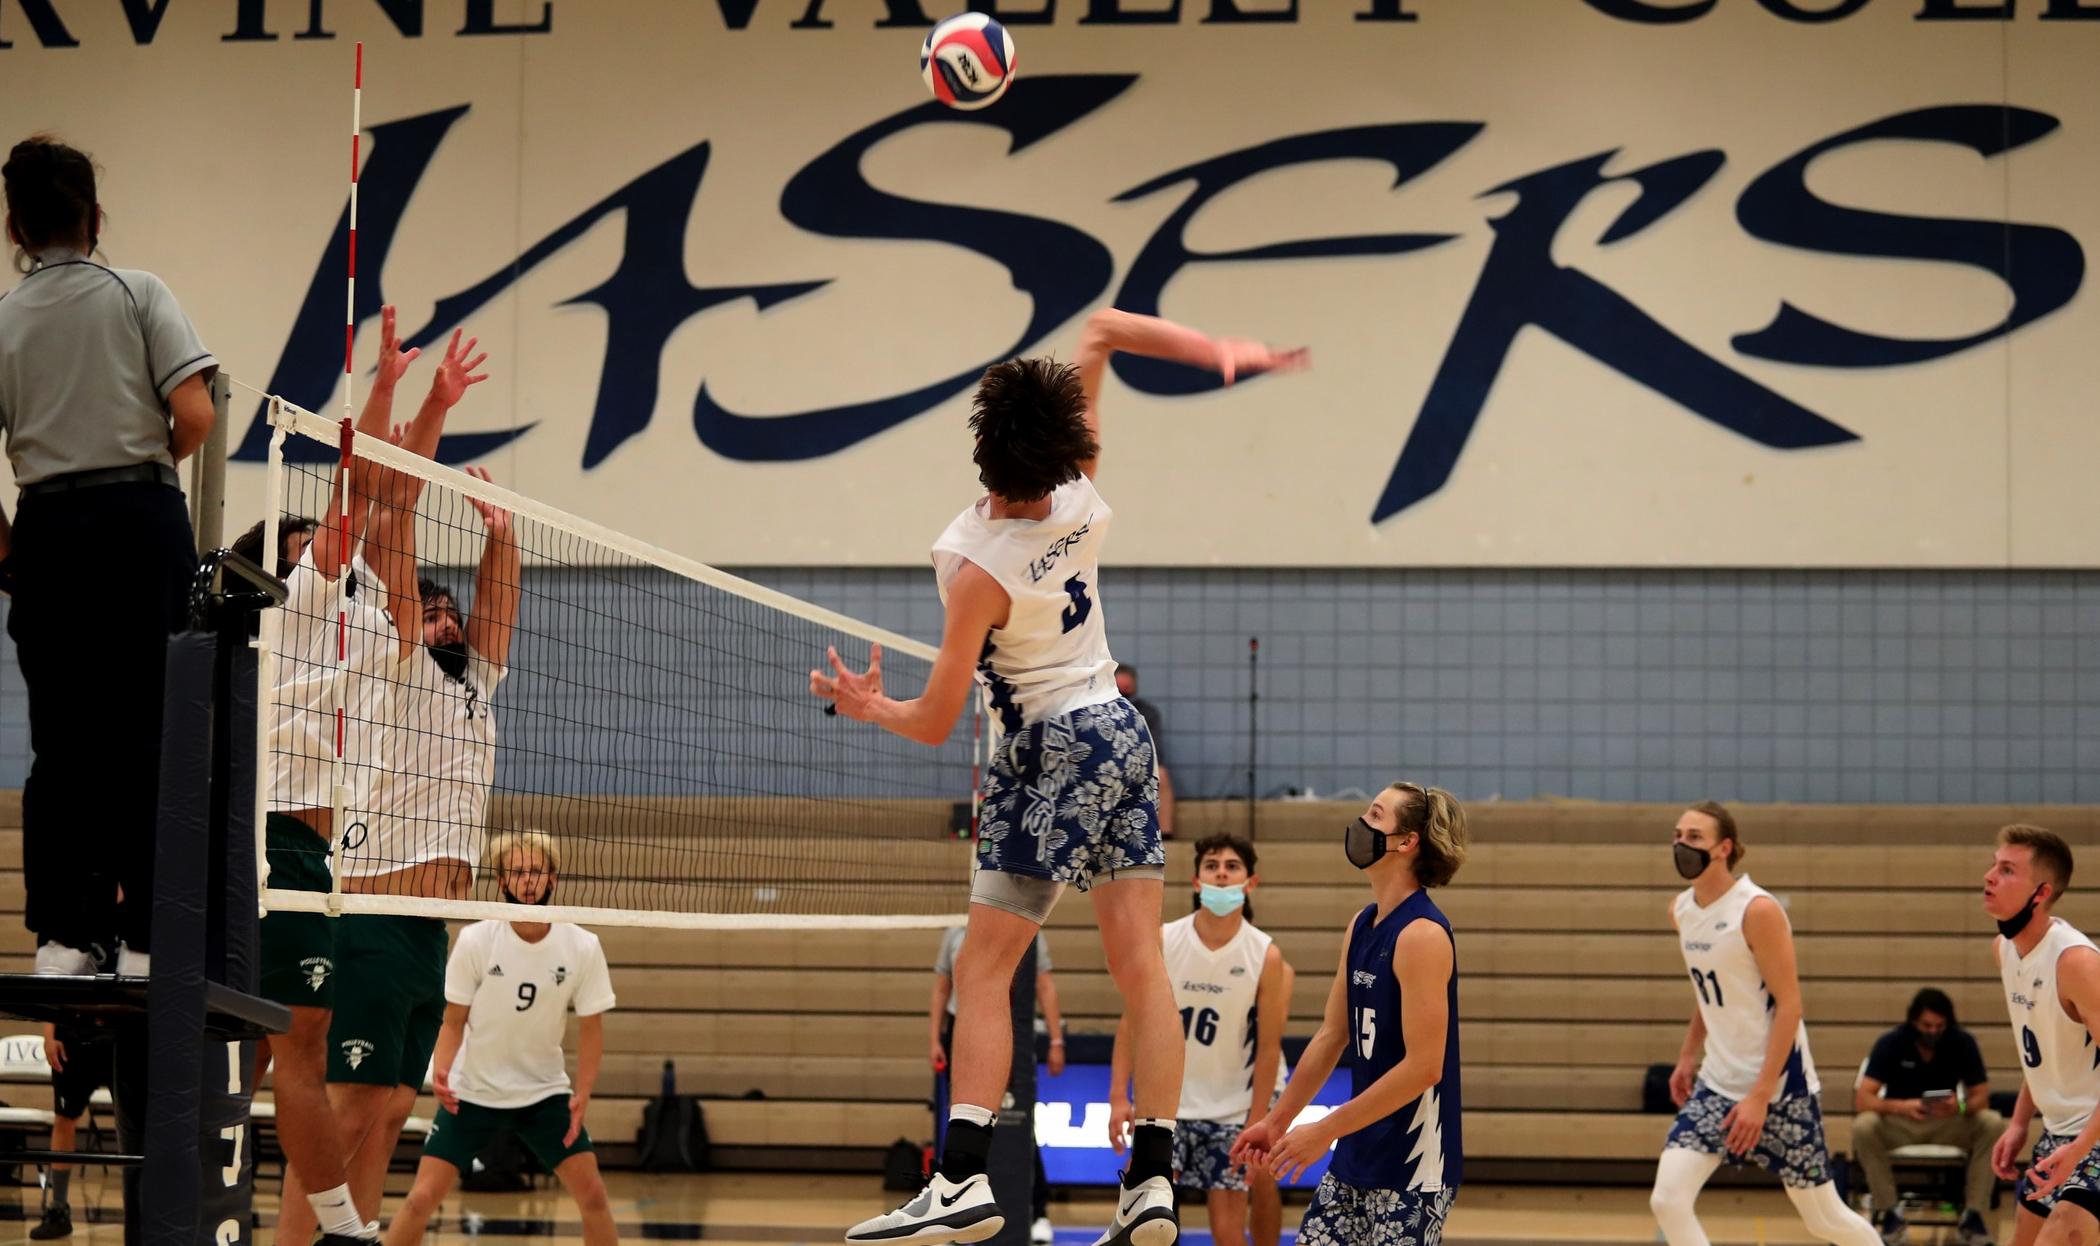 Men's volleyball team stays perfect heading into big week